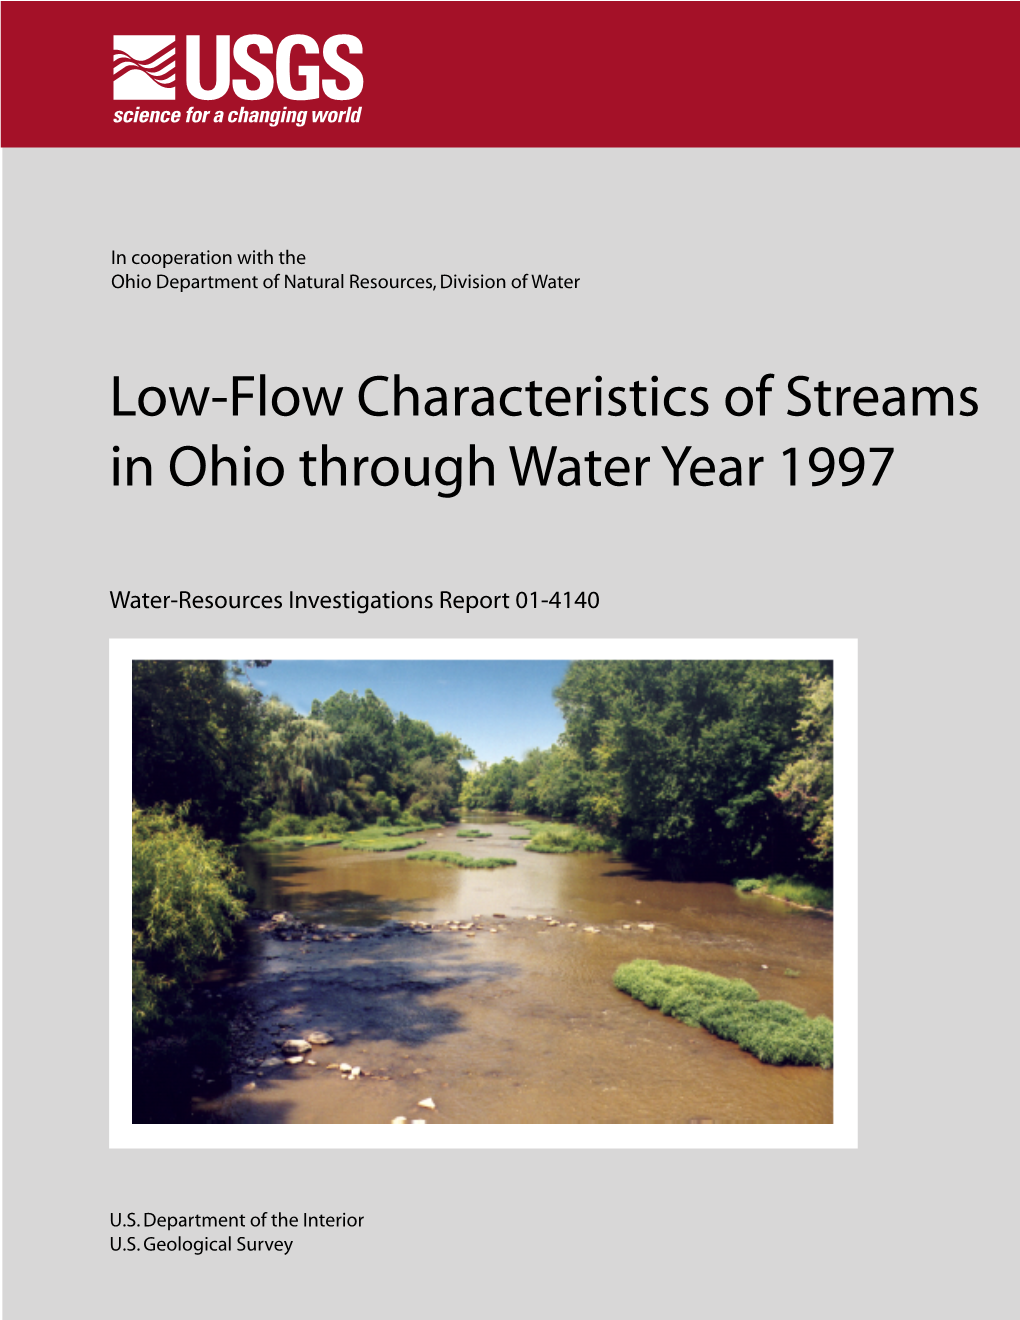 Low-Flow Characteristics of Streams in Ohio Through Water Year 1997